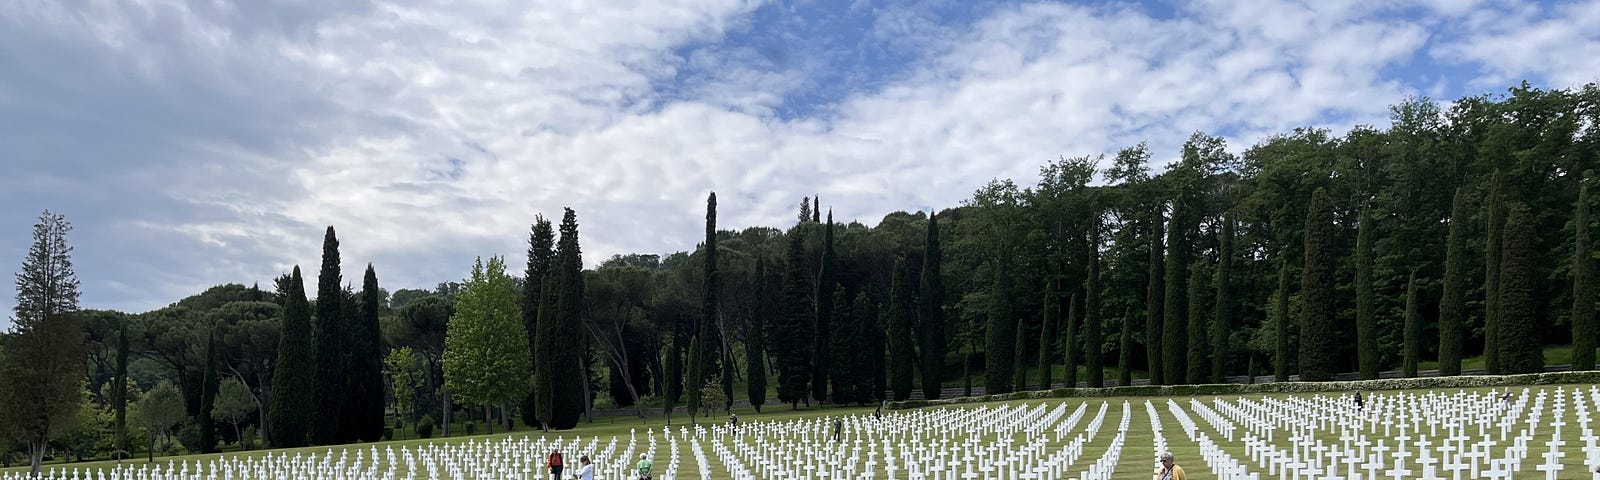 Picture of the American cemetery for fallensoldiers in WWII in Italy